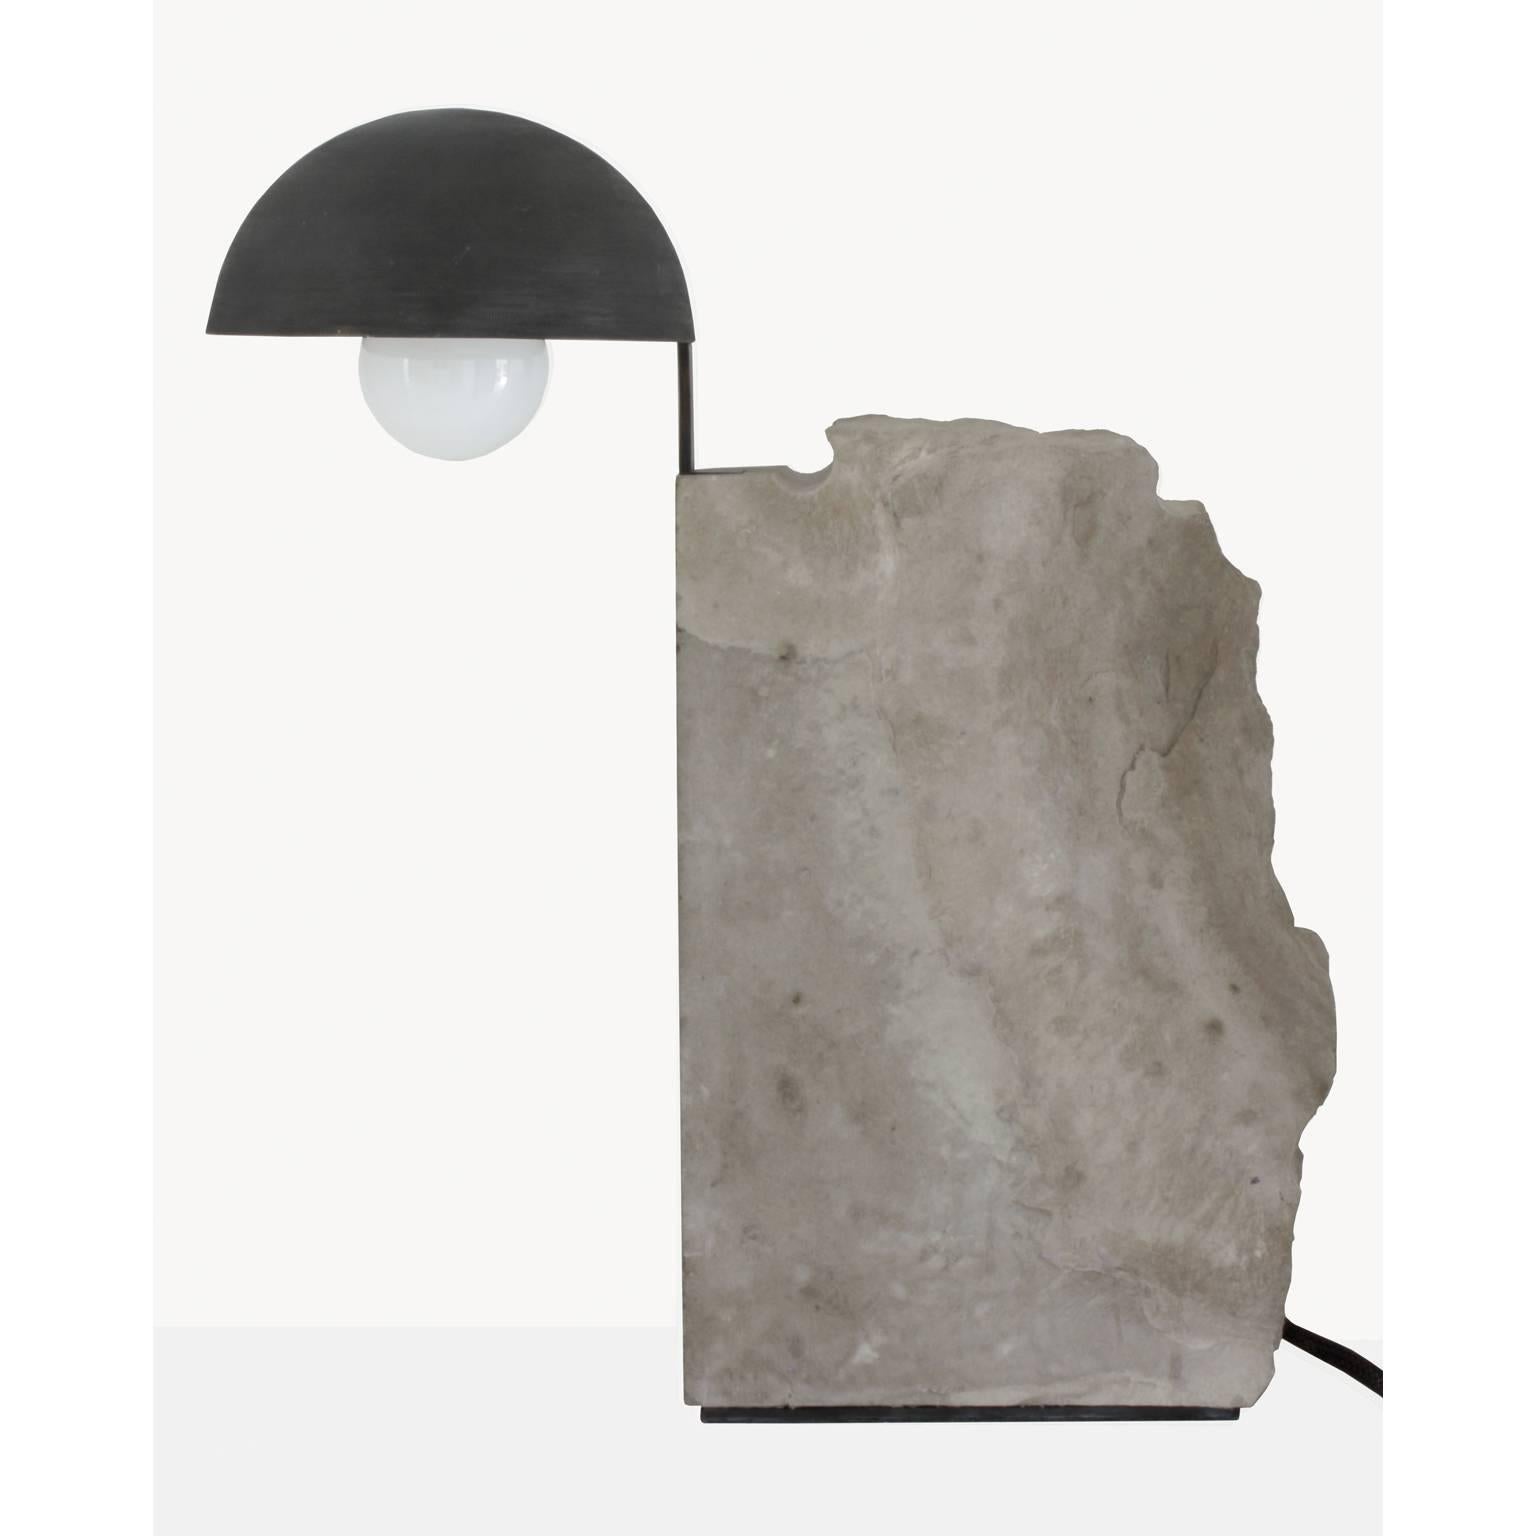 Brazilian contemporary table lamp by designer Gustavo Neves
Aeon collection
The Pedra table lamp
Materials: stone (limestone), metal (brass) darkened with manual treatment.
Brazil
2017
For this project, Gustavo Neves designed the collection Æon